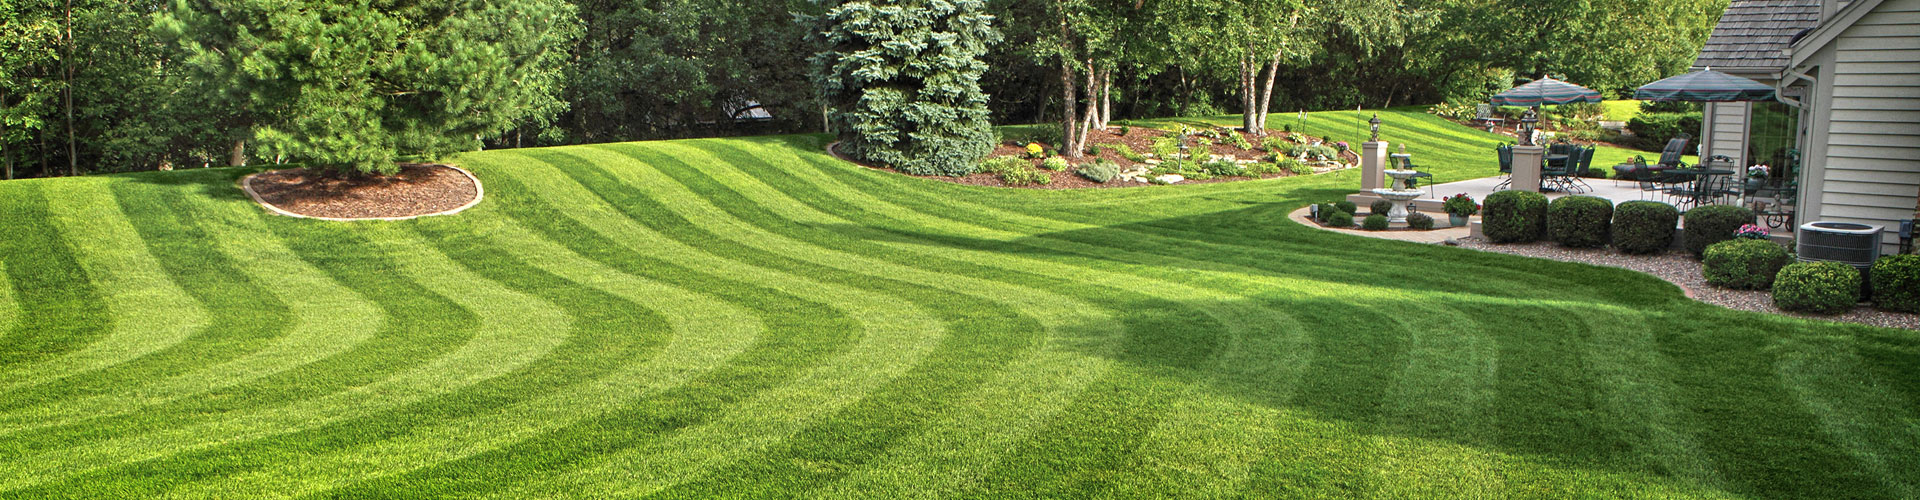 green lawn with stripes